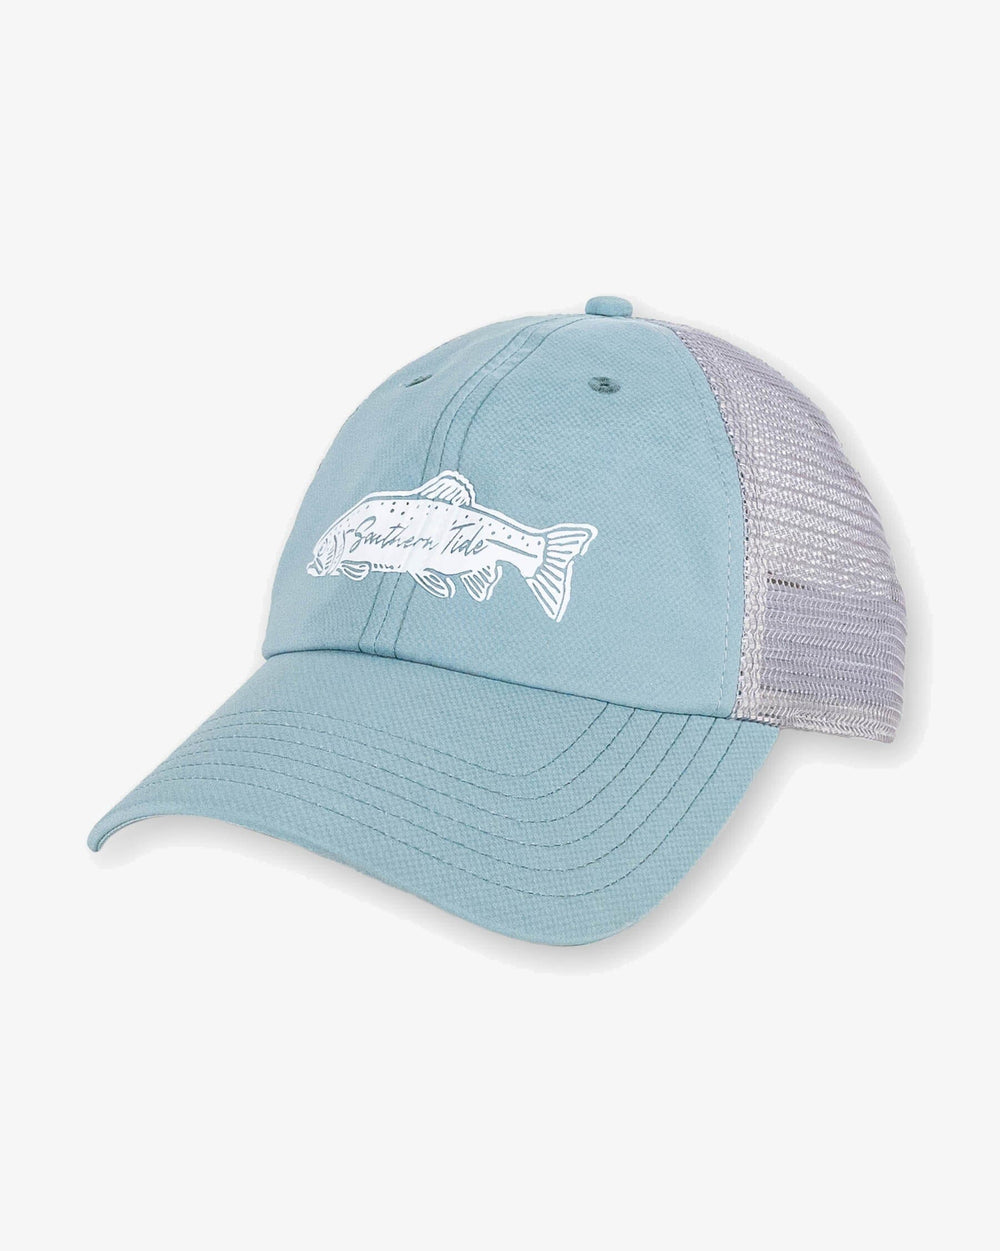 The front view of the Southern Tide Flyday Trucker Hat by Southern Tide - Green